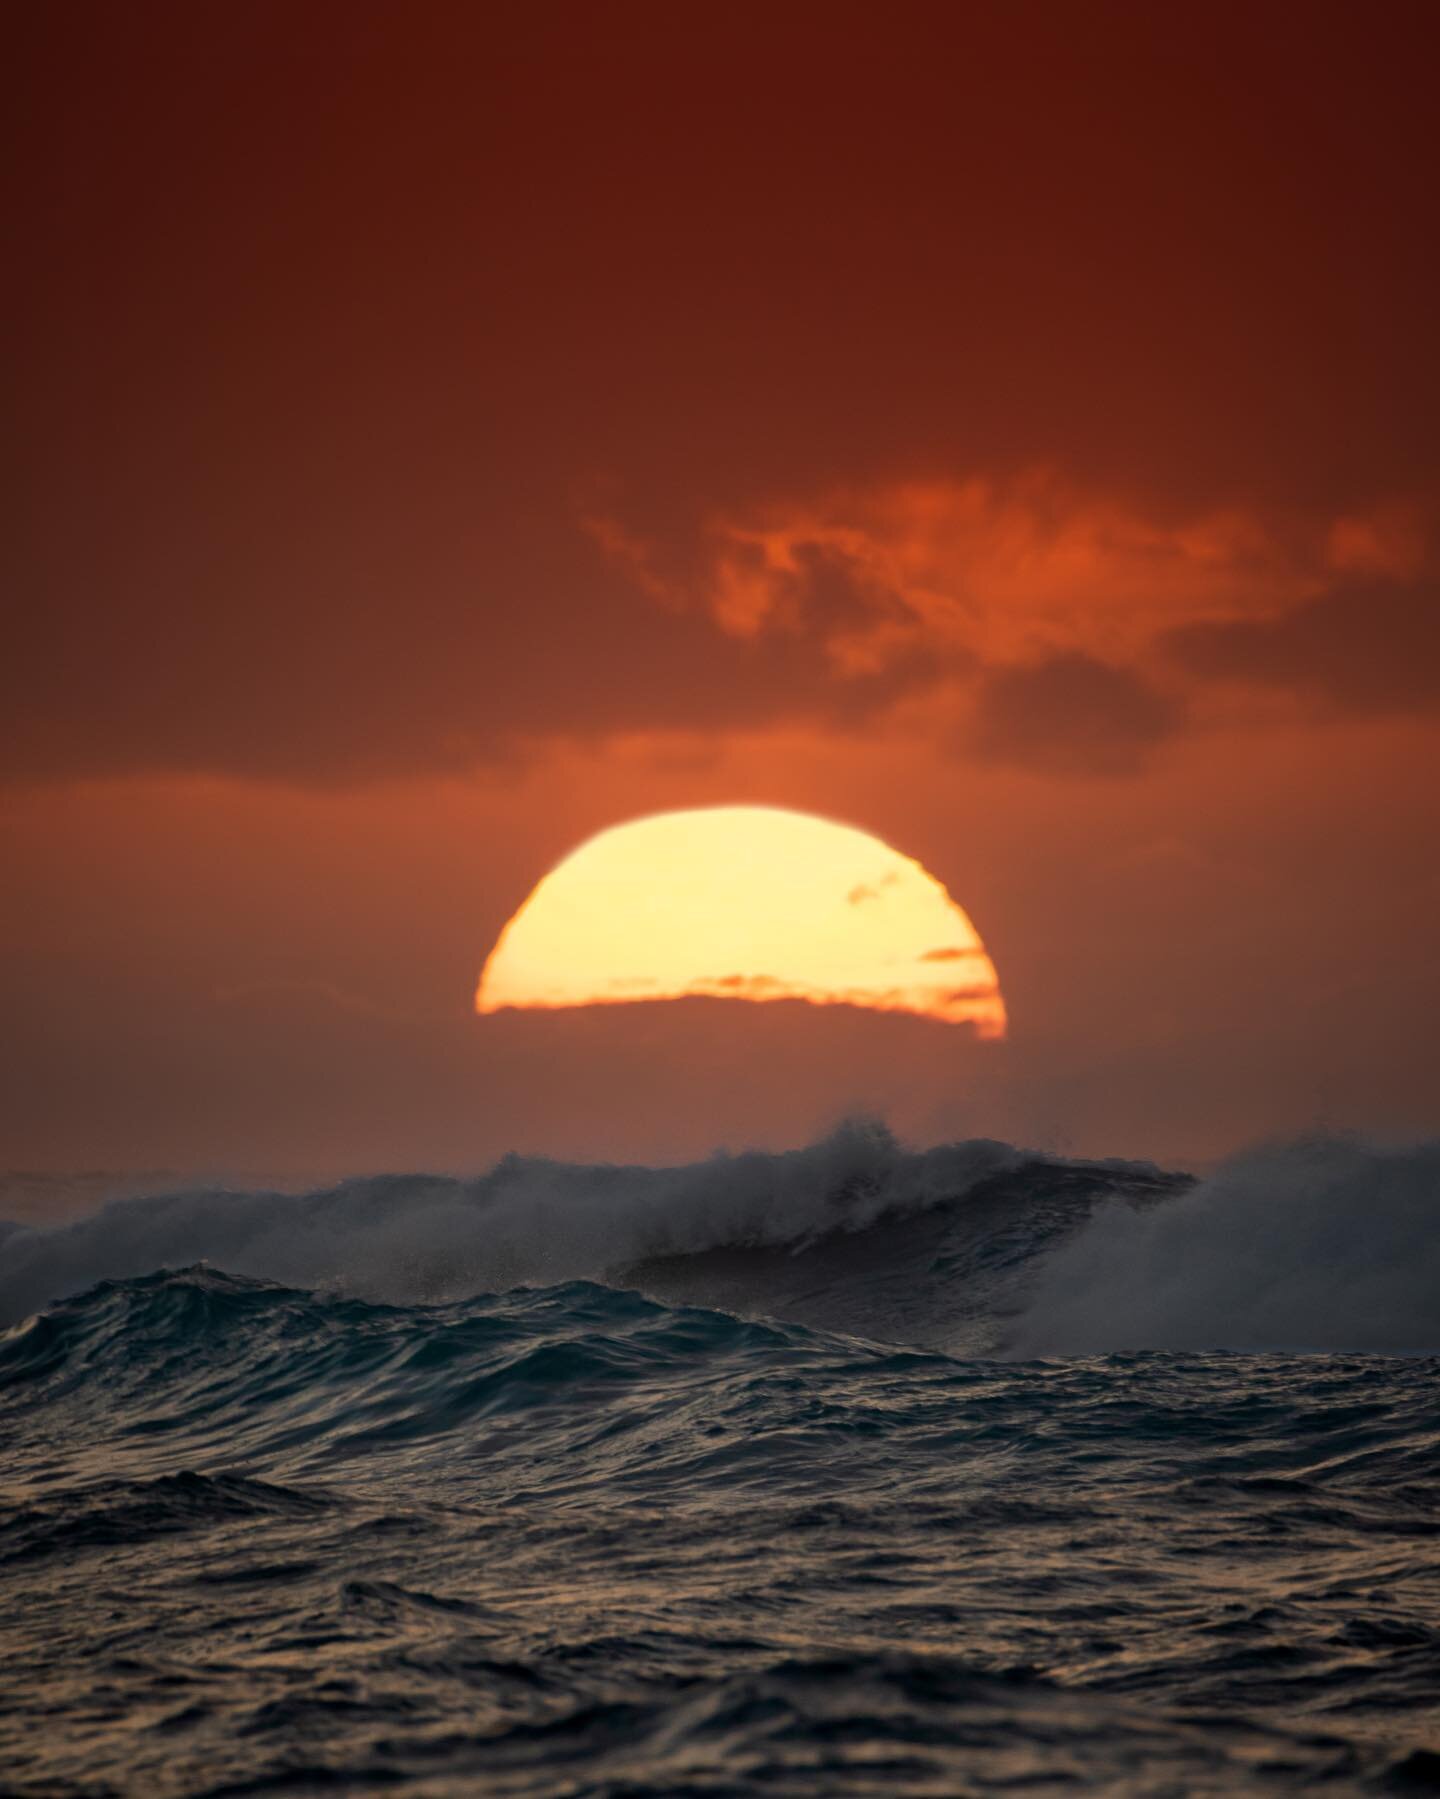 Half-Baked

Our warmth giving fireball gives way to encroaching seas and crimson skies on the west side of Oahu.